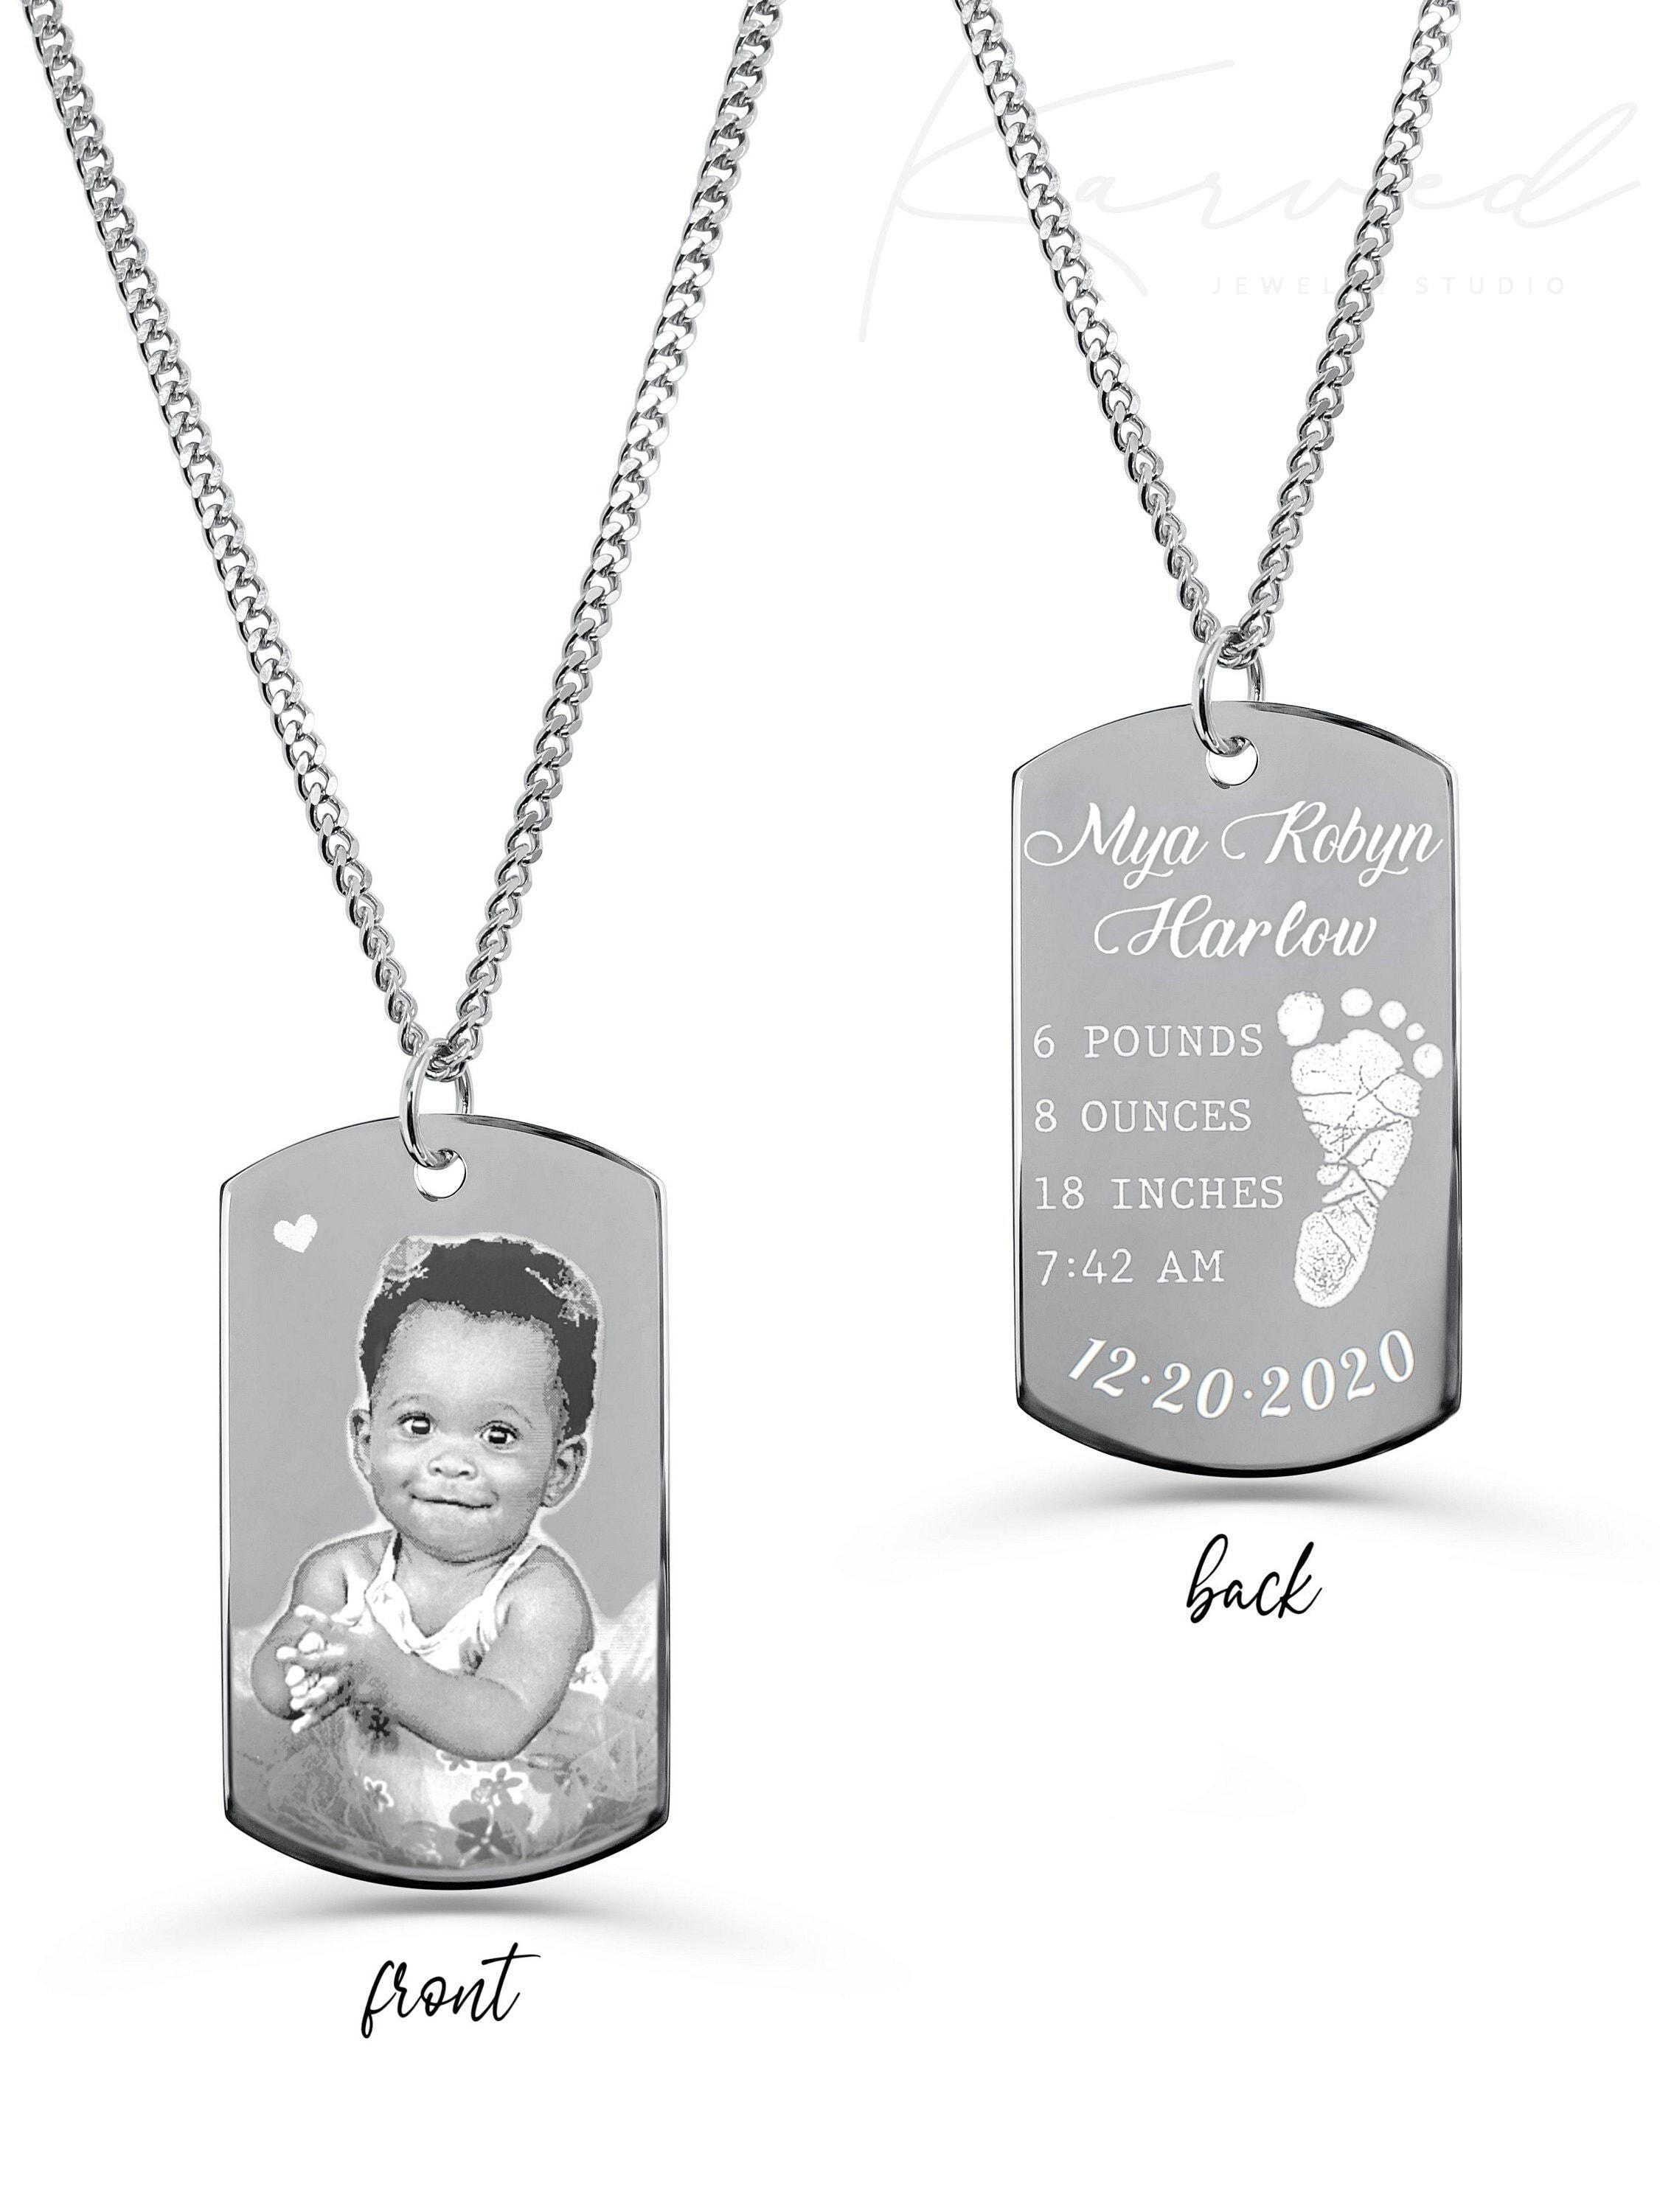 Personalised Dainty Name Tag Necklace • Custom Engraved Mini Tags • Dog Tag  Necklace • Mom Necklace wth Kids Name • Gift for Mom Grandma 238